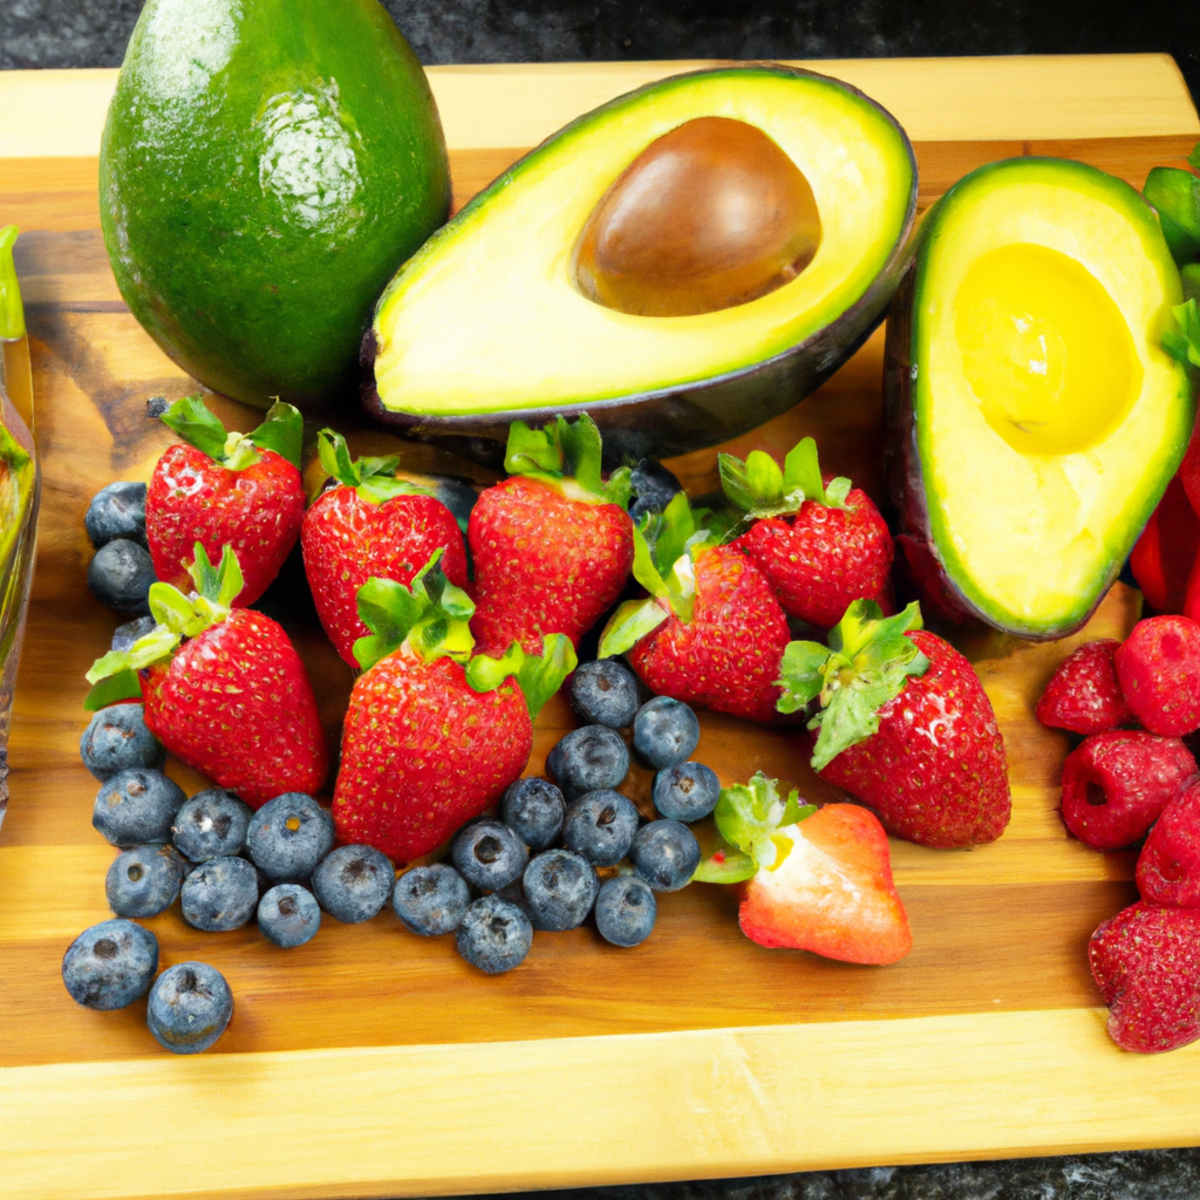 The photo features a colorful array of heart-healthy superfoods arranged on a wooden cutting board. In the center of the photo is a ripe avocado, sliced in half to reveal its creamy green flesh and large pit. Surrounding the avocado are several bright red strawberries, plump blueberries, and juicy raspberries, all bursting with antioxidants and vitamins. A handful of raw almonds and walnuts are scattered around the edges of the board, providing a satisfying crunch and a dose of heart-healthy fats. A sprig of fresh mint adds a pop of green and a refreshing aroma to the scene. The photo is expertly lit, with natural light casting a warm glow on the vibrant colors of the food. It's a mouth-watering reminder that taking care of your heart can be both delicious and nutritious.